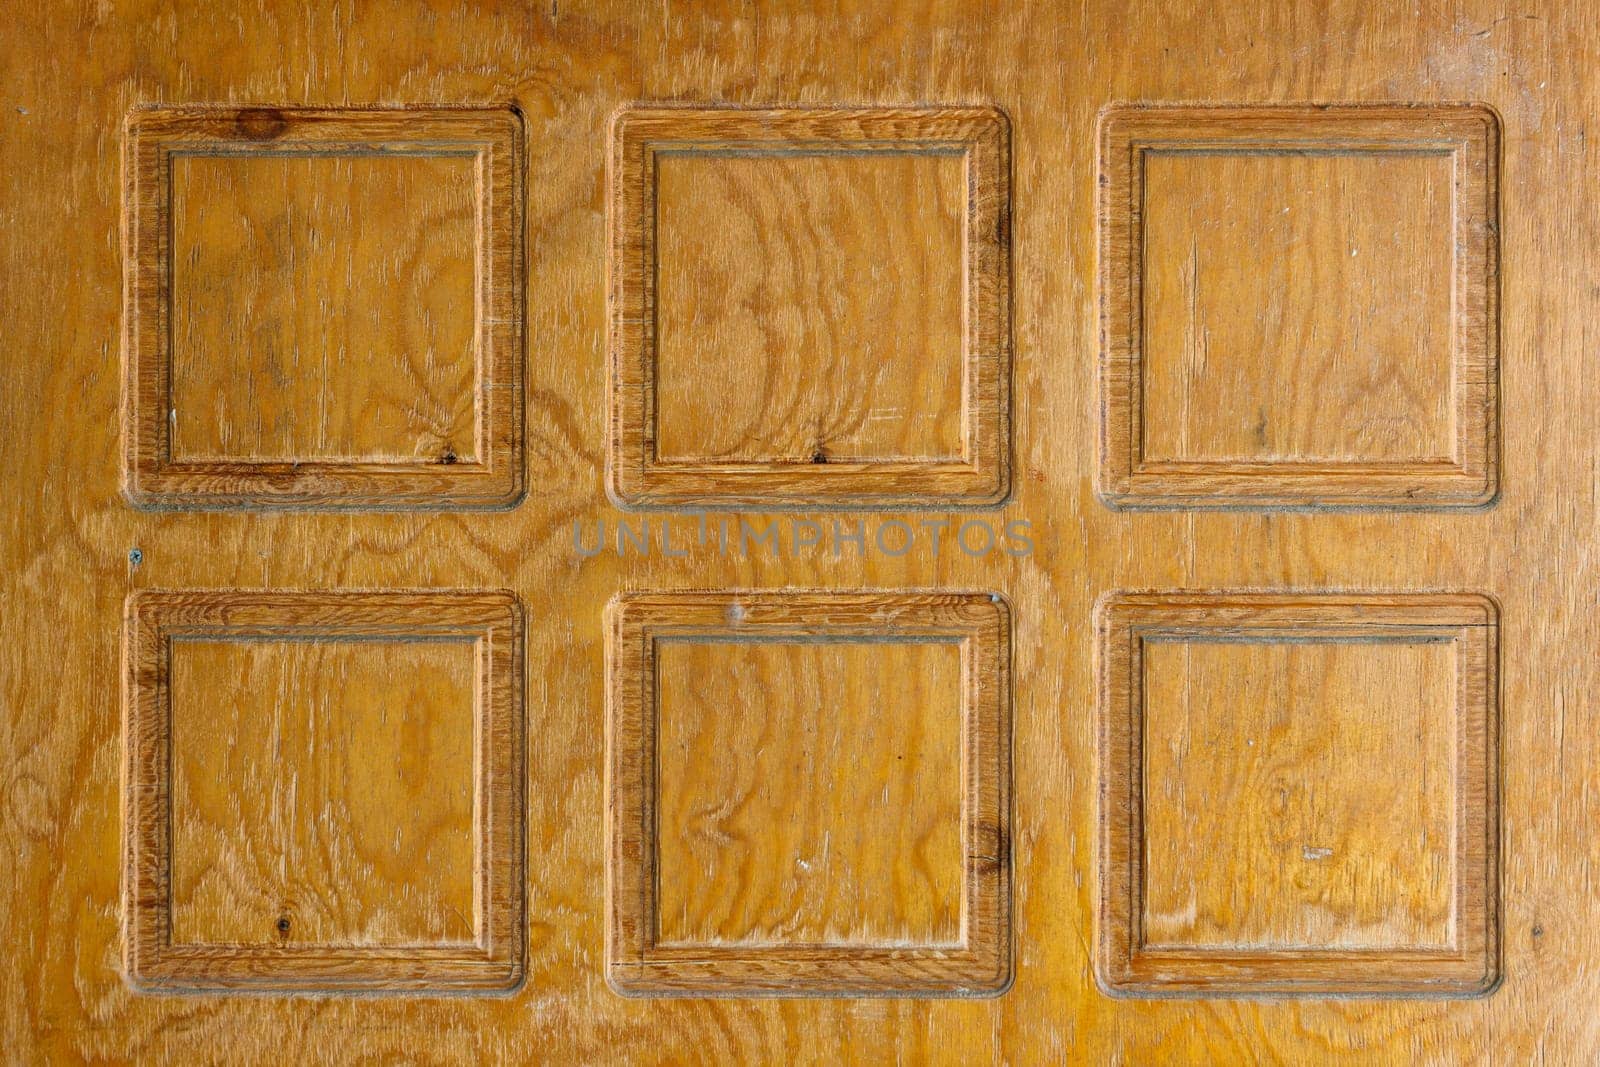 Brown plywood door texture with square decorative recessions carved into it